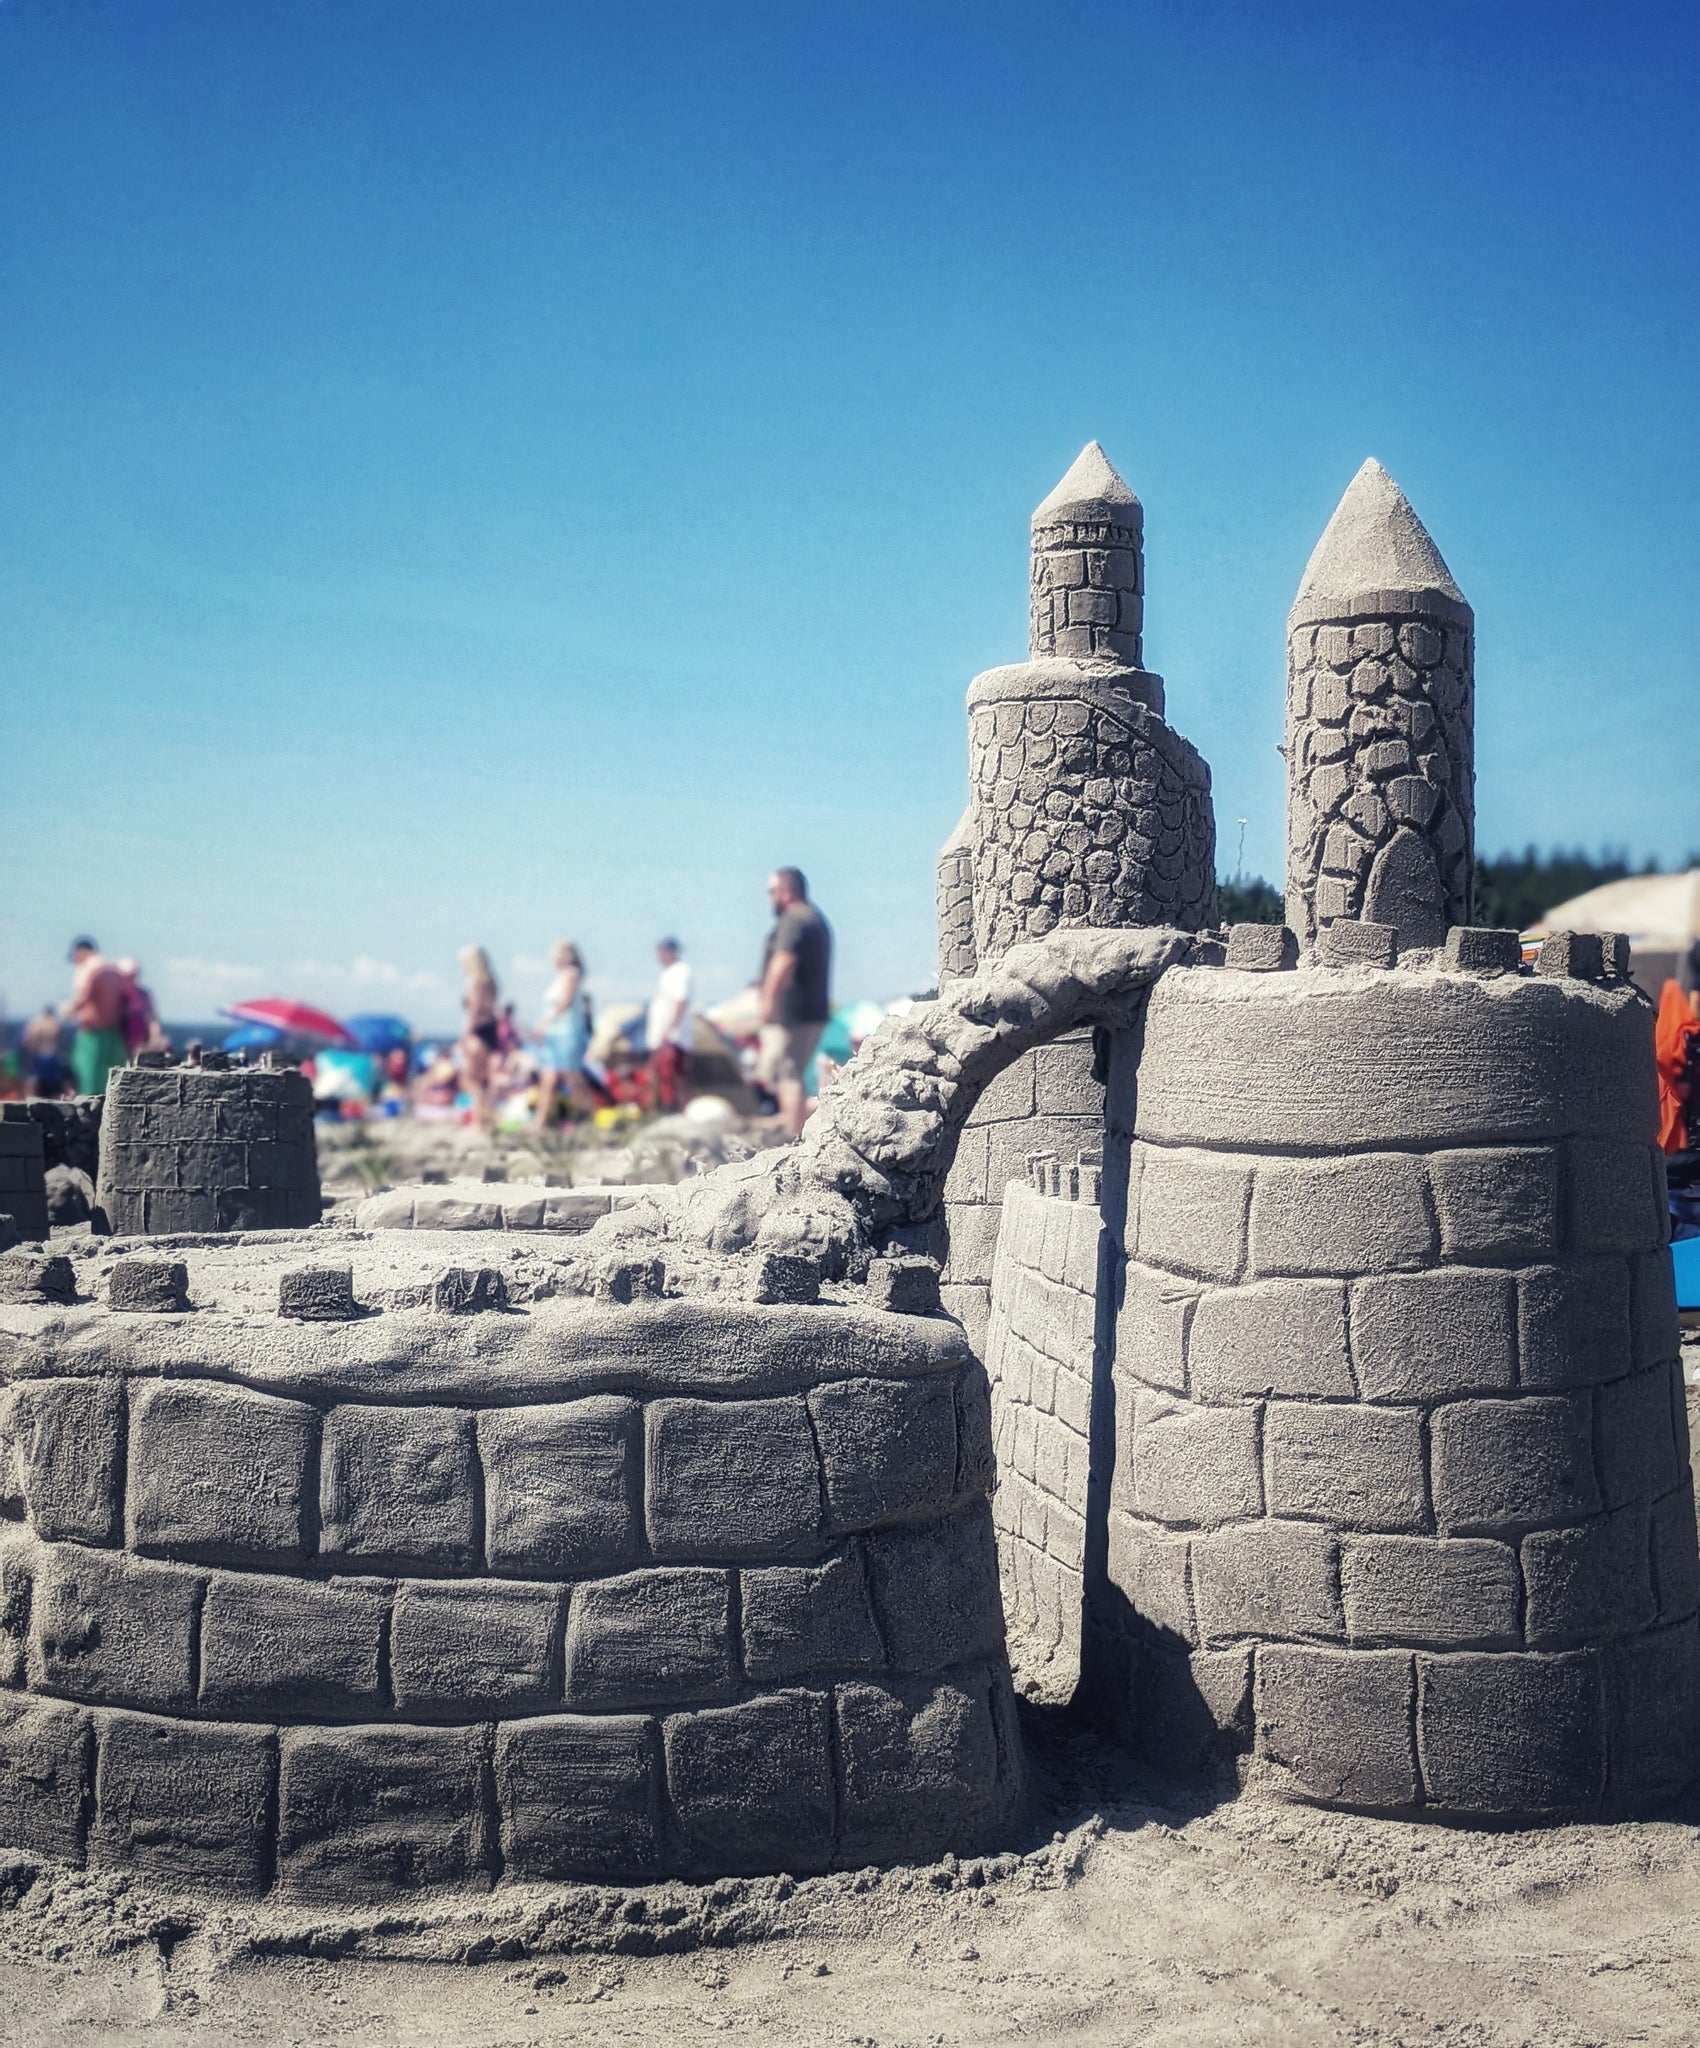 A very detailed Sandcastle about 4 feet tall!